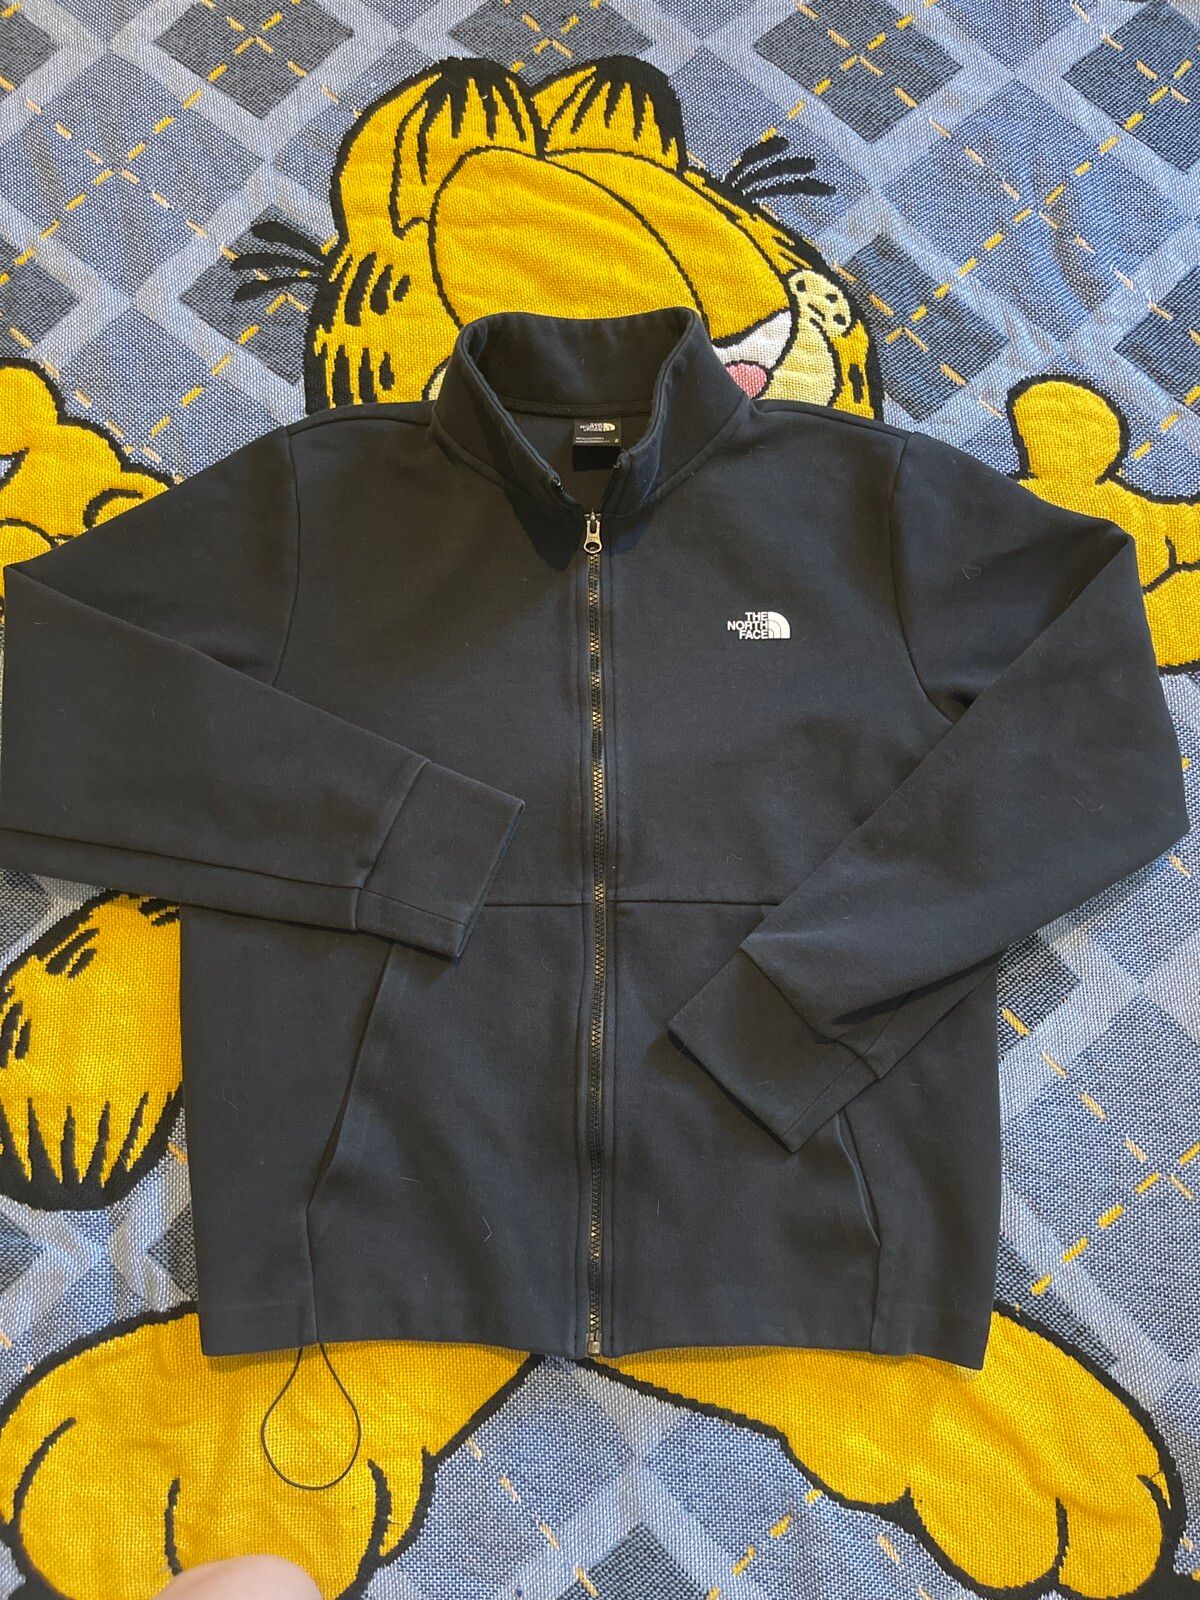 Vintage The north face Zip-Up | Grailed